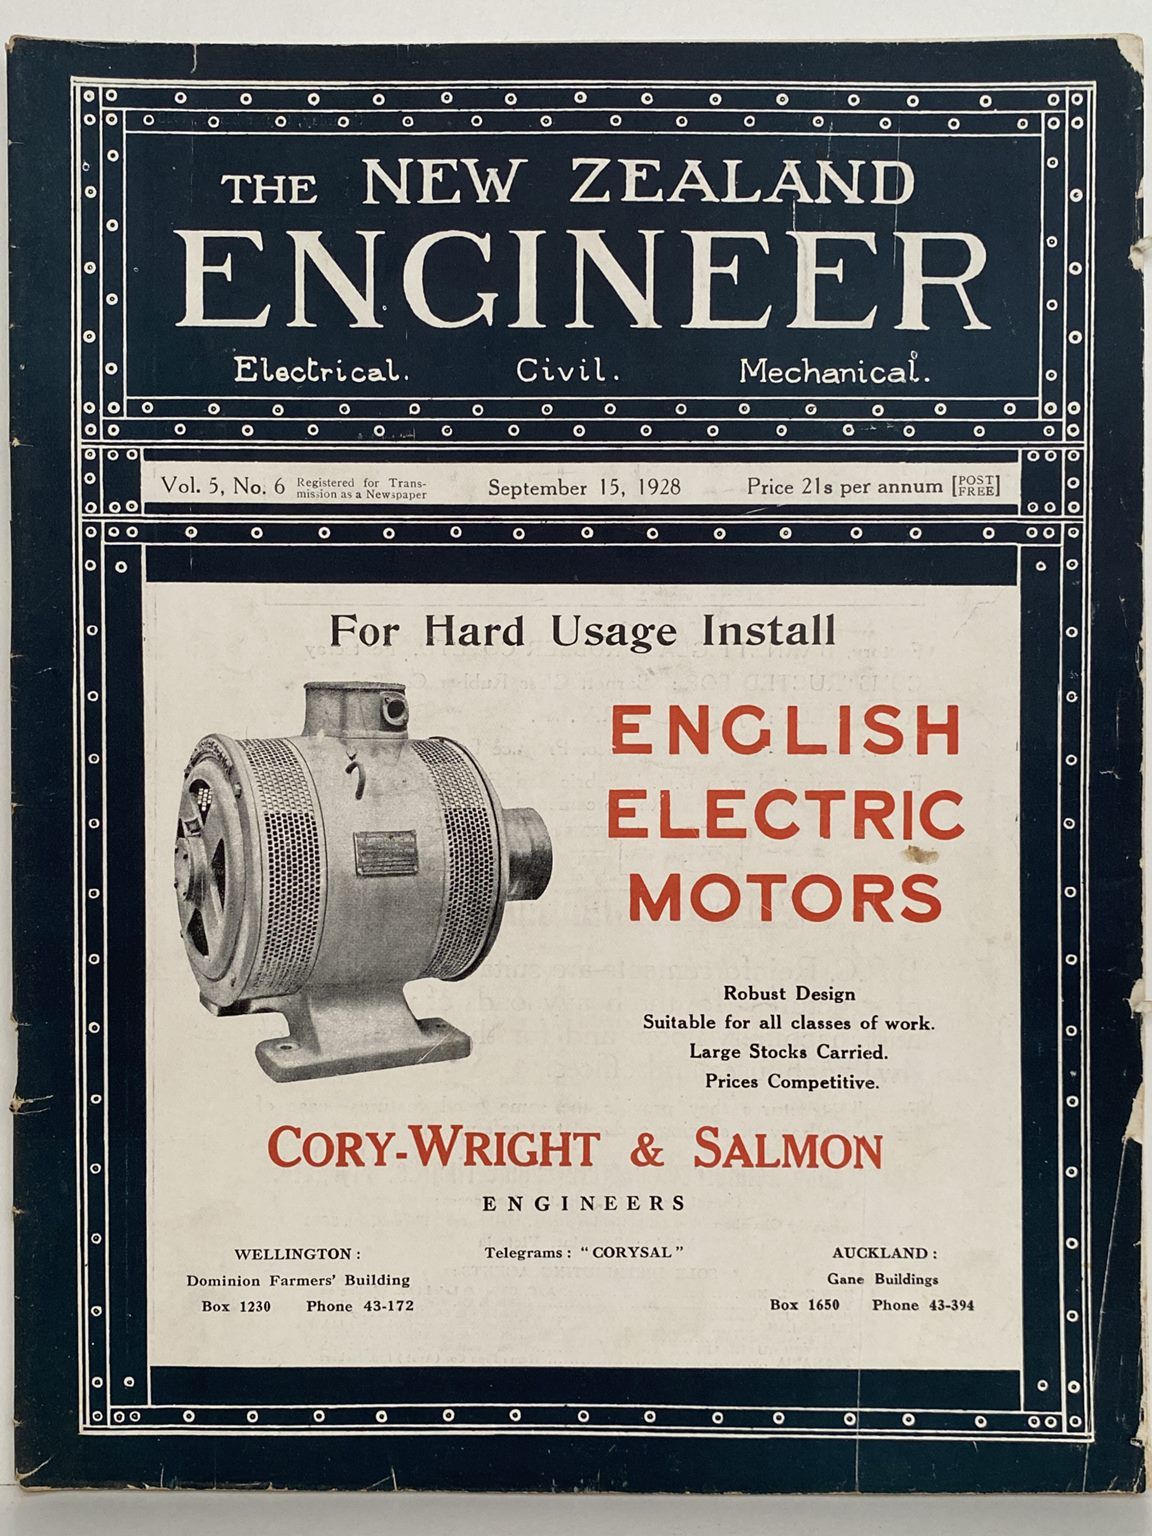 OLD MAGAZINE: The New Zealand Engineer Vol. 5, No. 6 - 15 September 1928